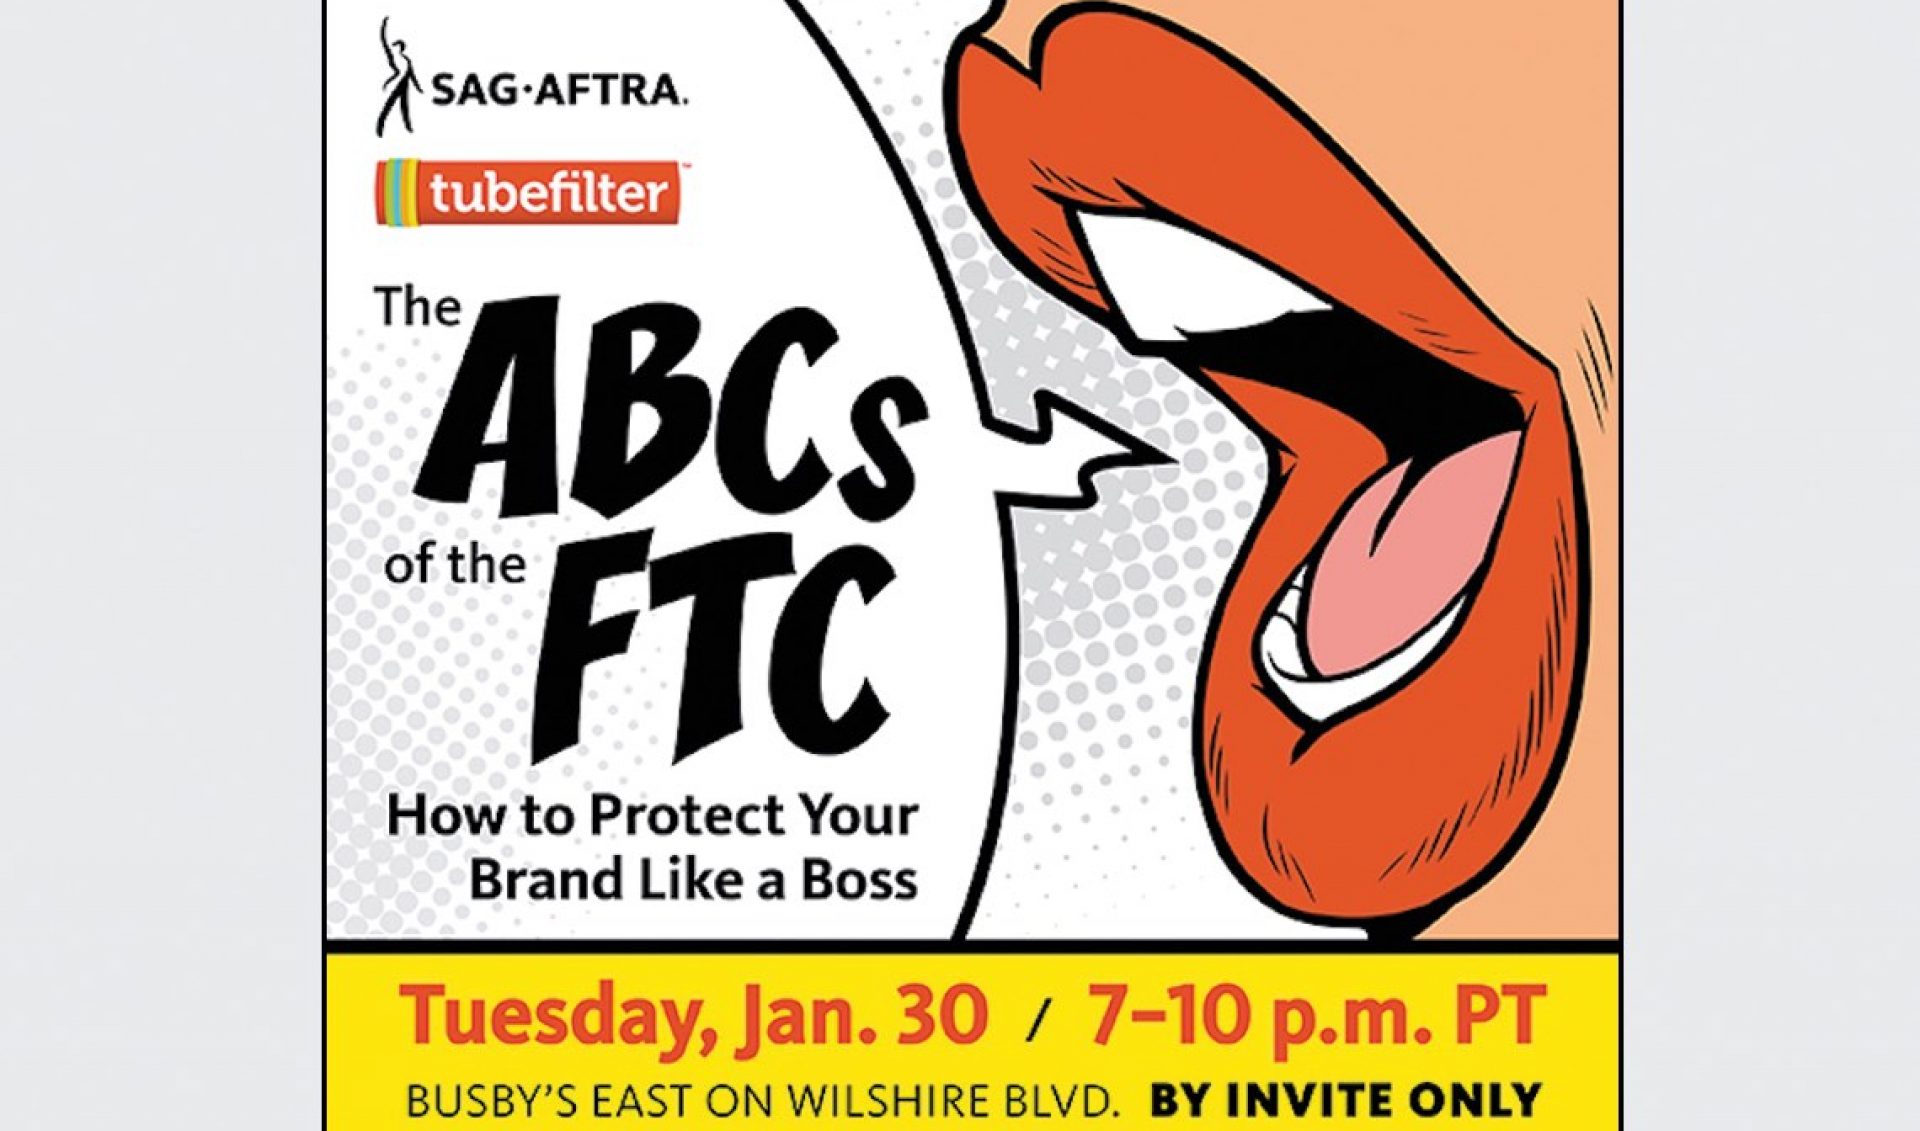 FTC Regional Director And SAG-AFTRA National Executive Director Added To Tubefilter Meetup